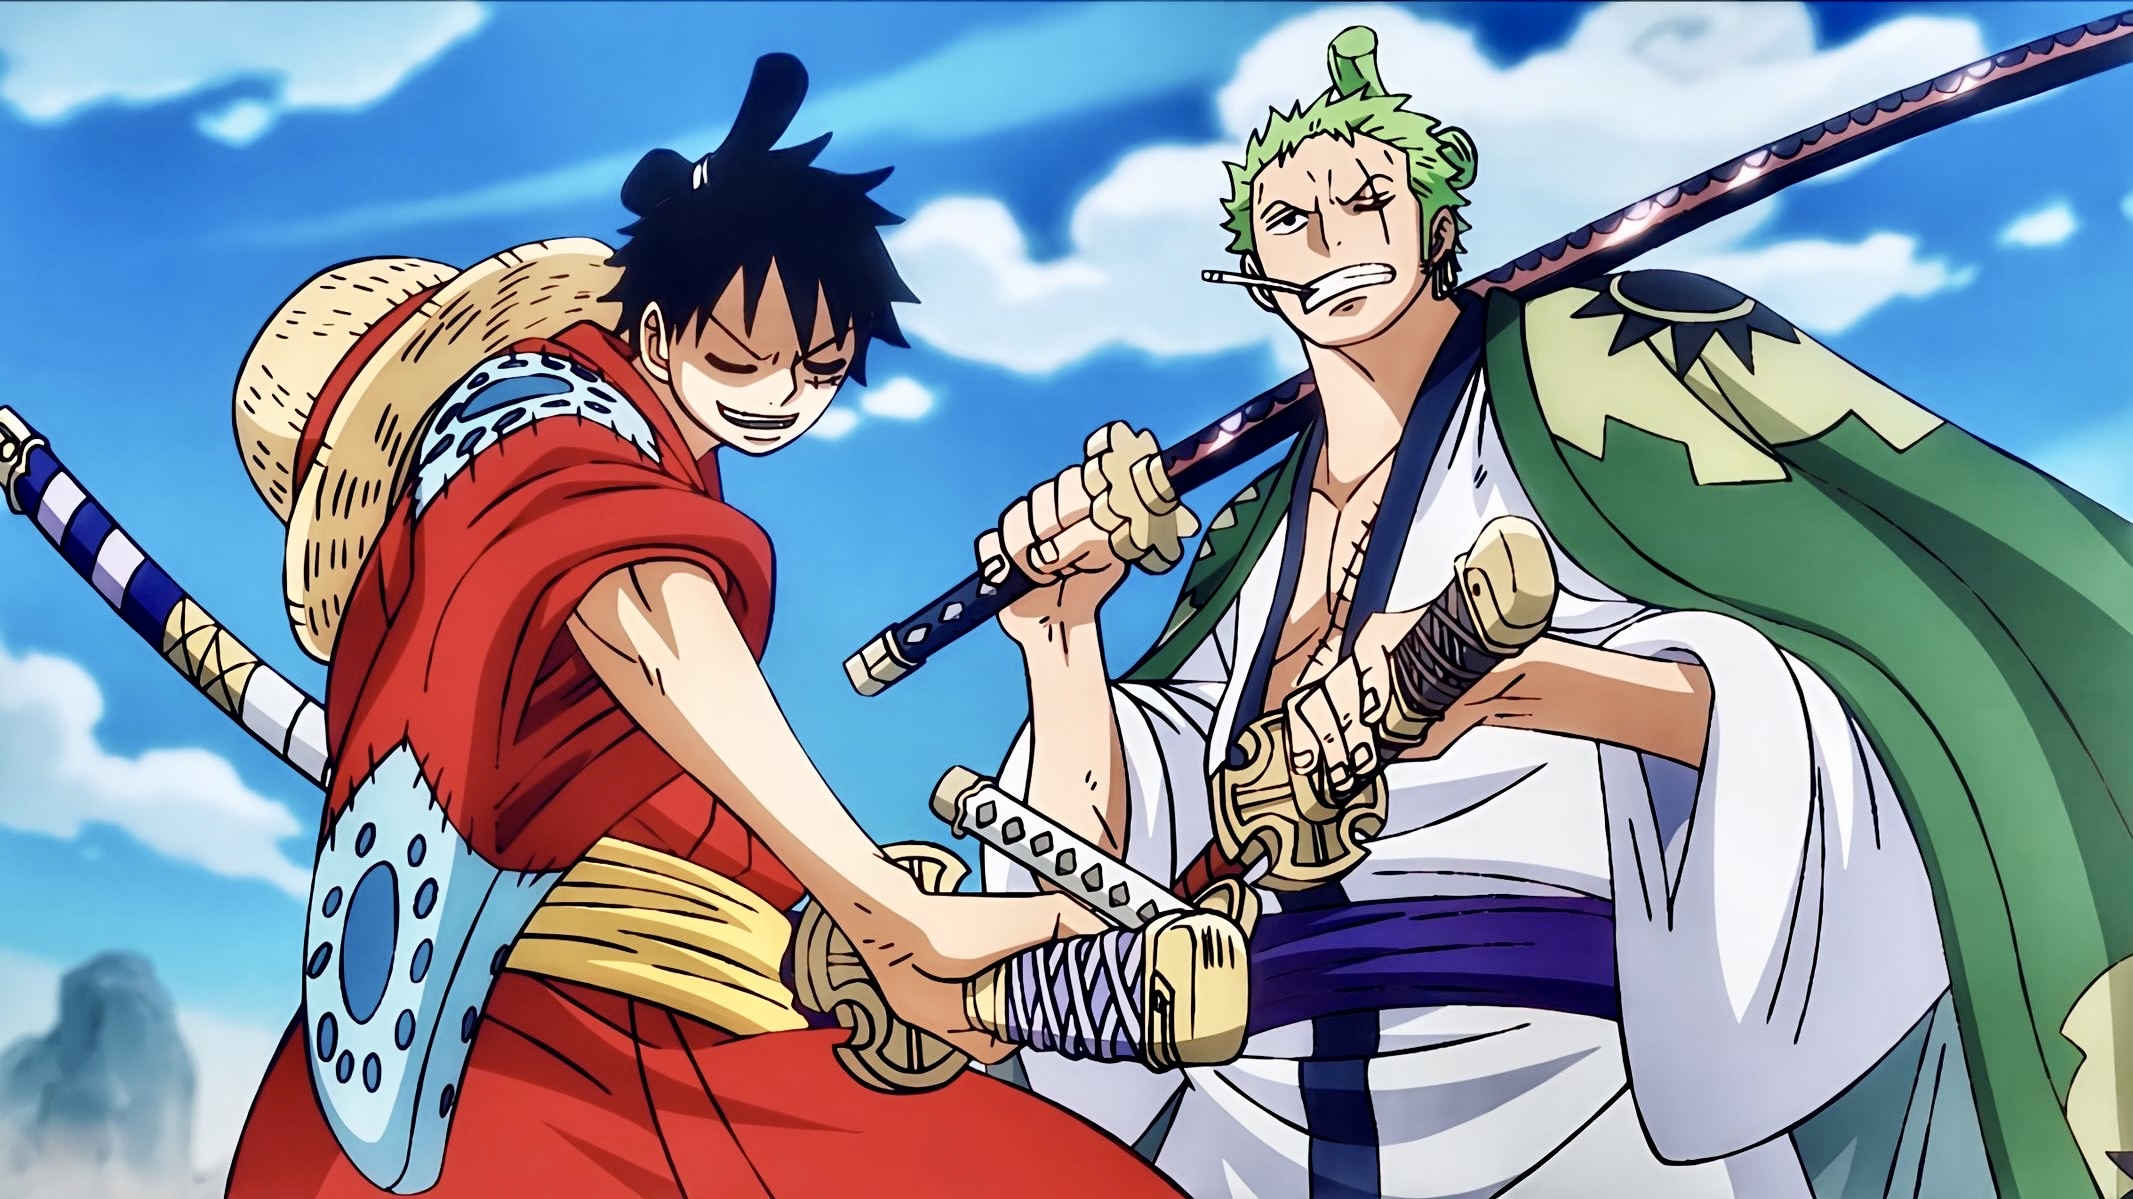 Monkey D Luffy From One Piece with Roronoa Zoro